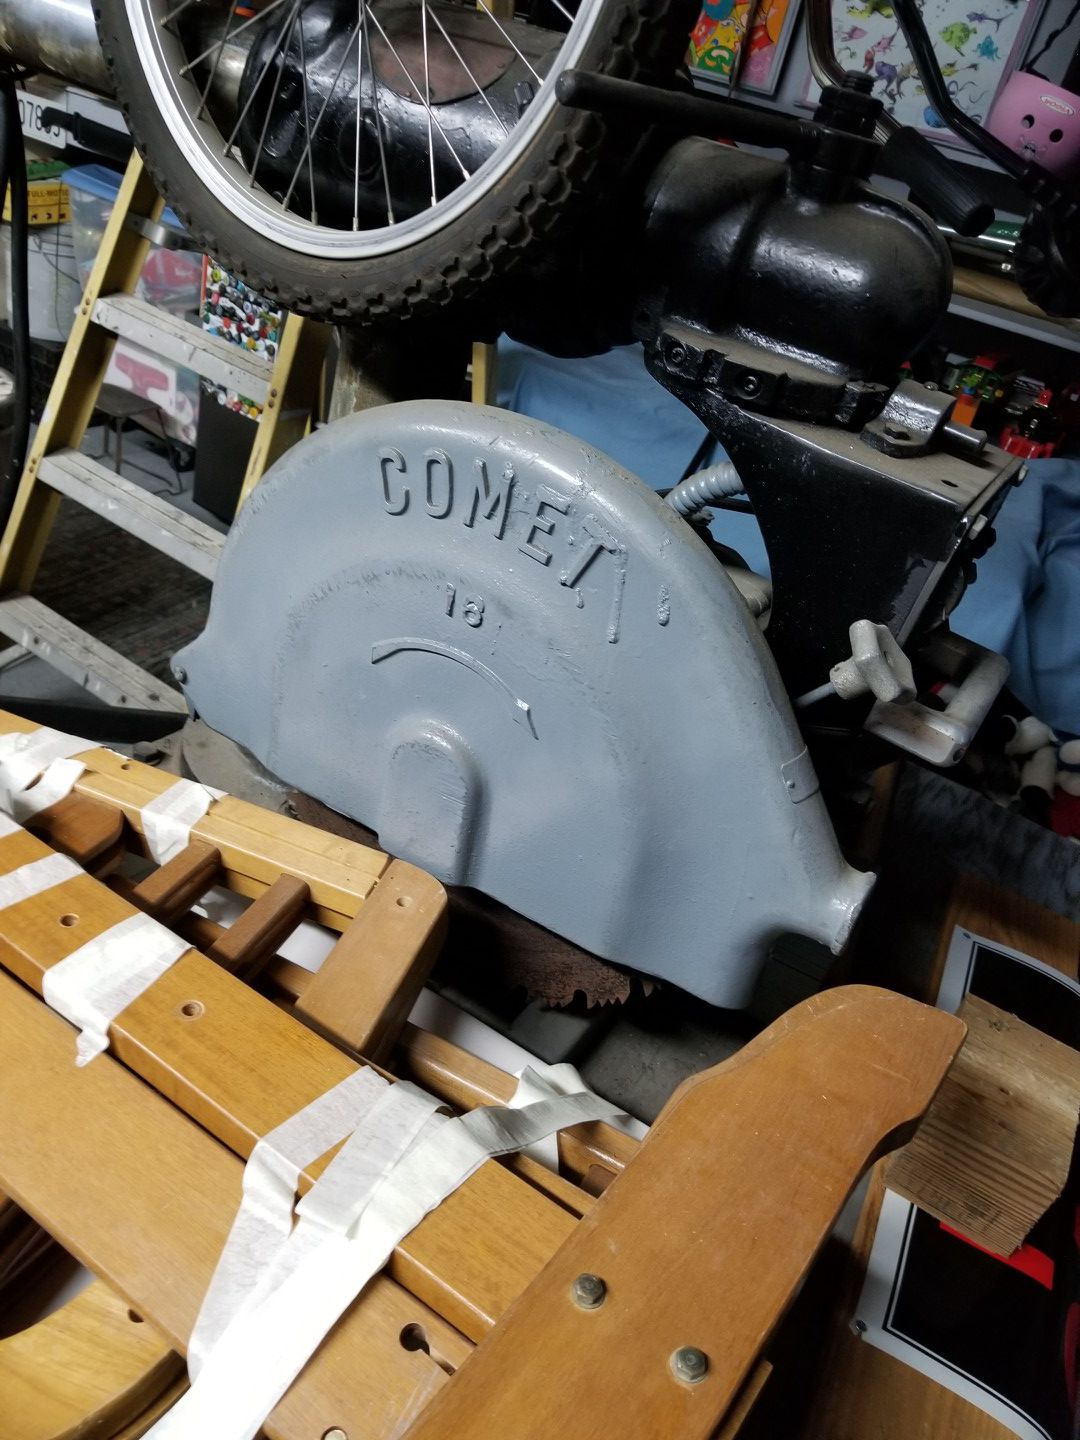 Comet table saw with trailer. Works